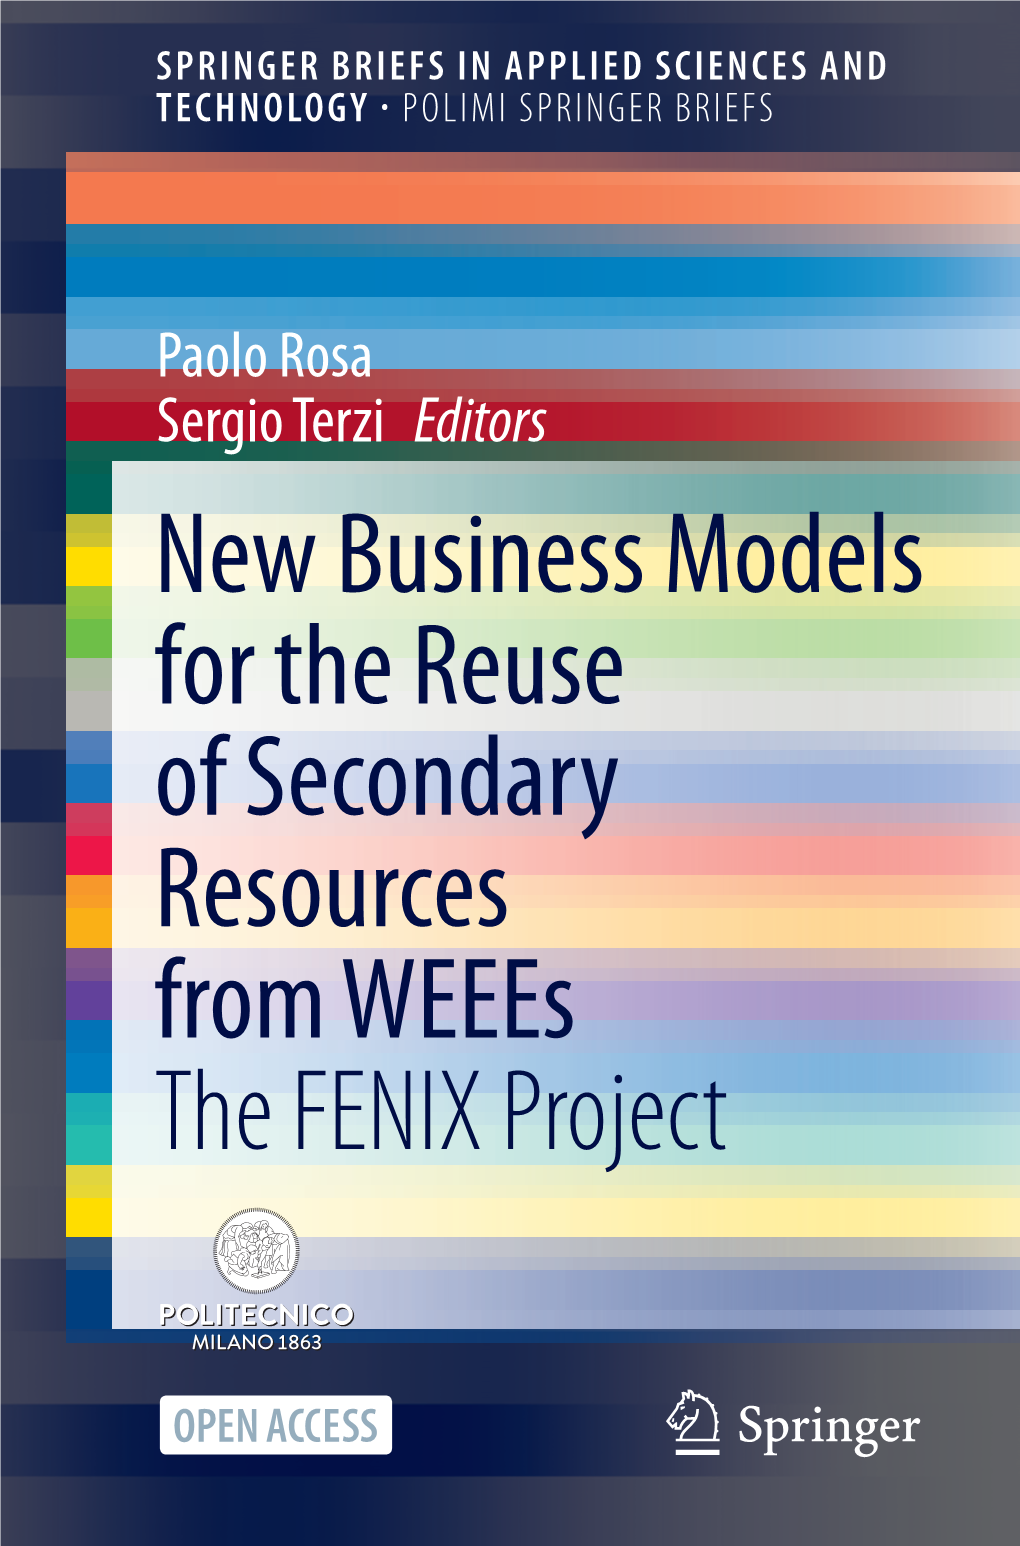 New Business Models for the Reuse of Secondary Resources from Weees the FENIX Project Springerbriefs in Applied Sciences and Technology